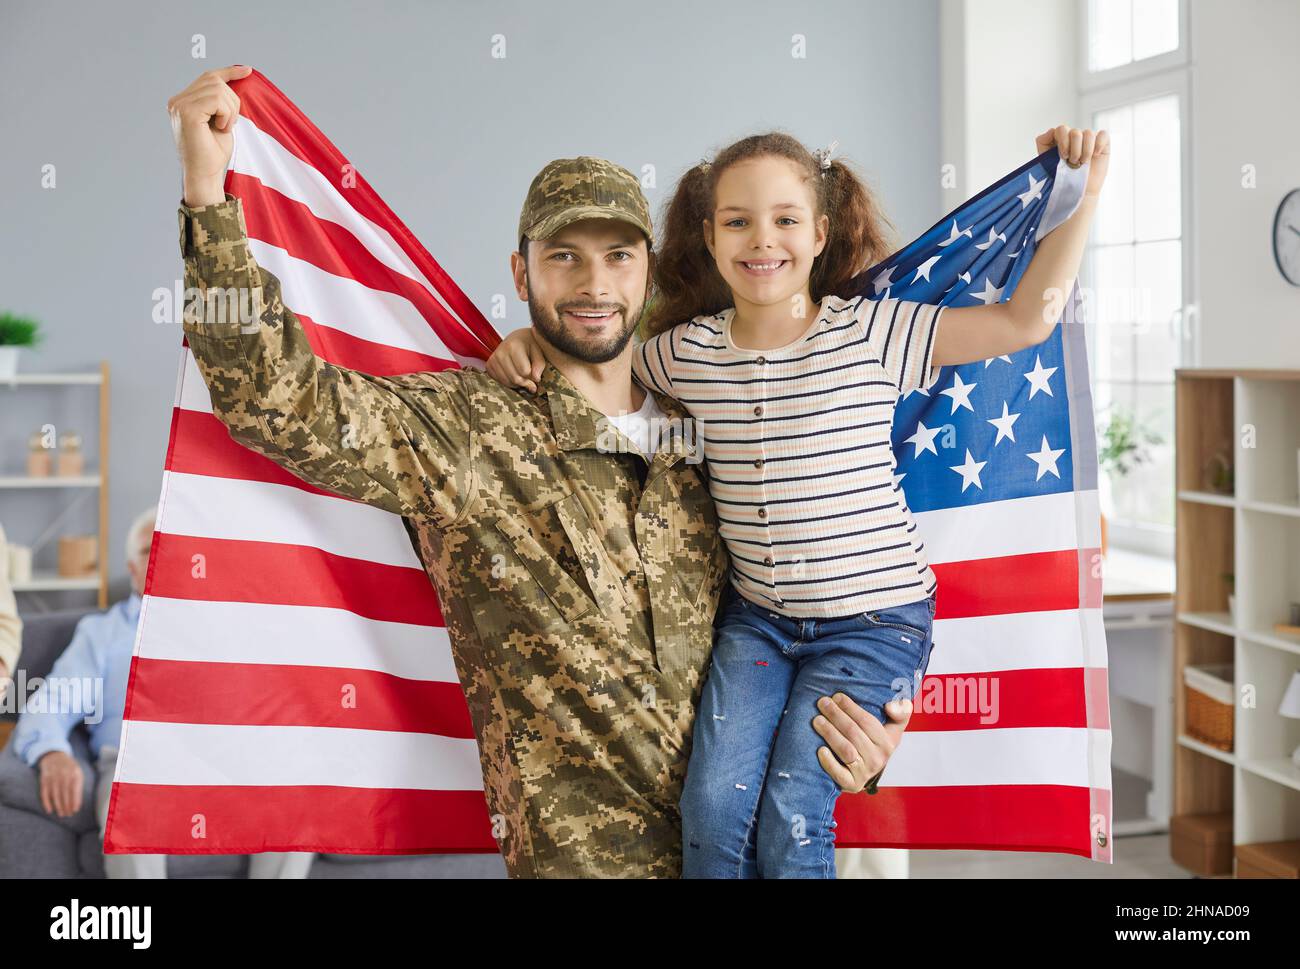 Portrait of a military father and his daughter holding an American flag while standing at home. Stock Photo